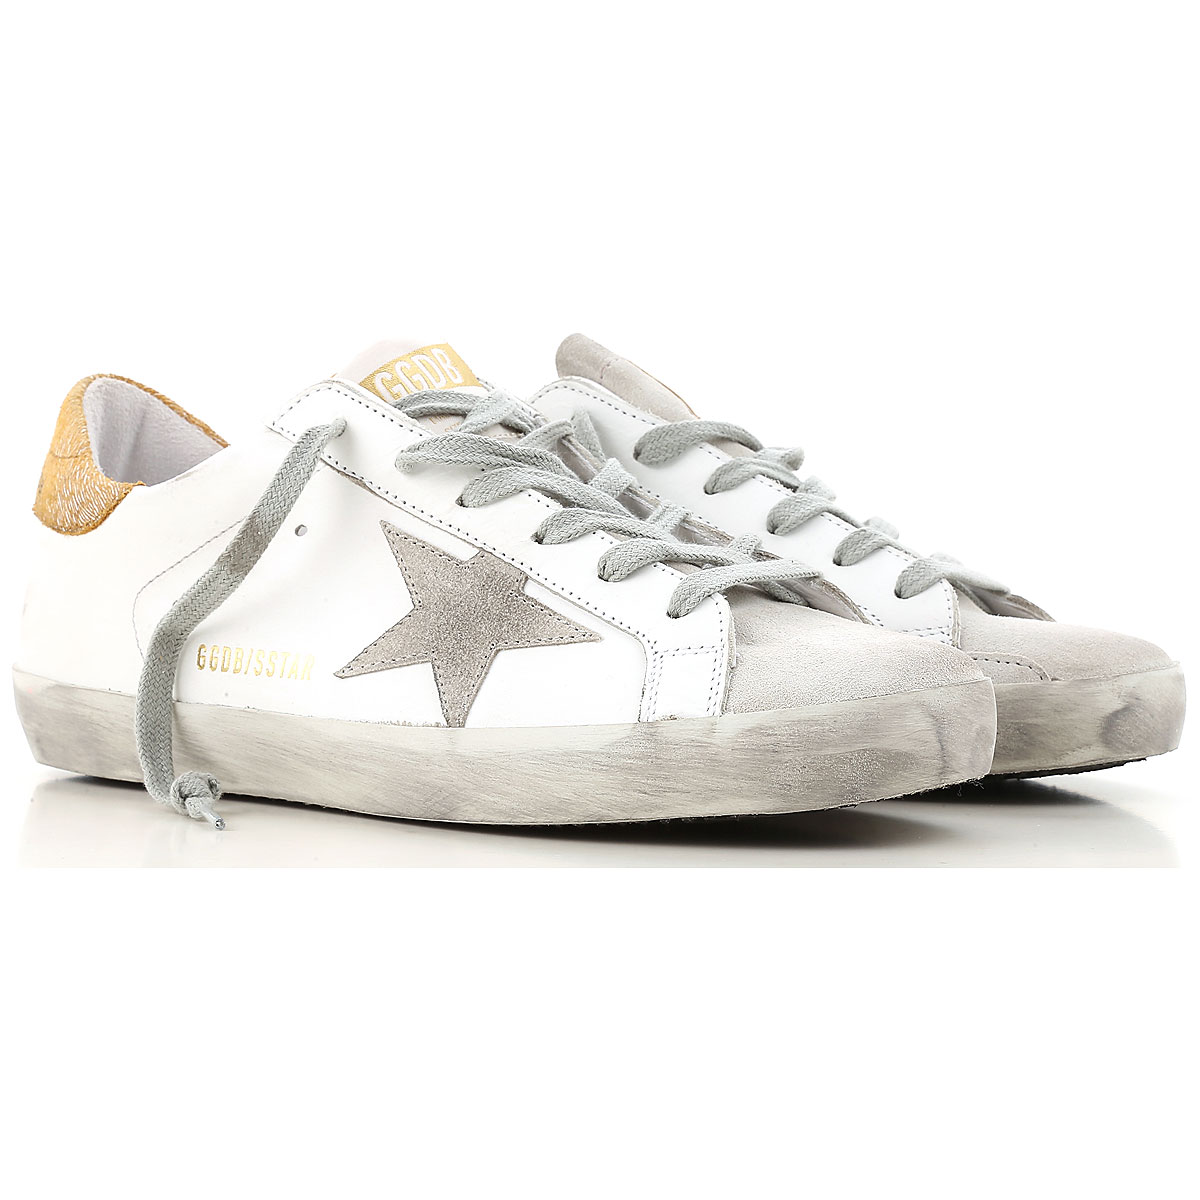 Womens Shoes Golden Goose, Style code 